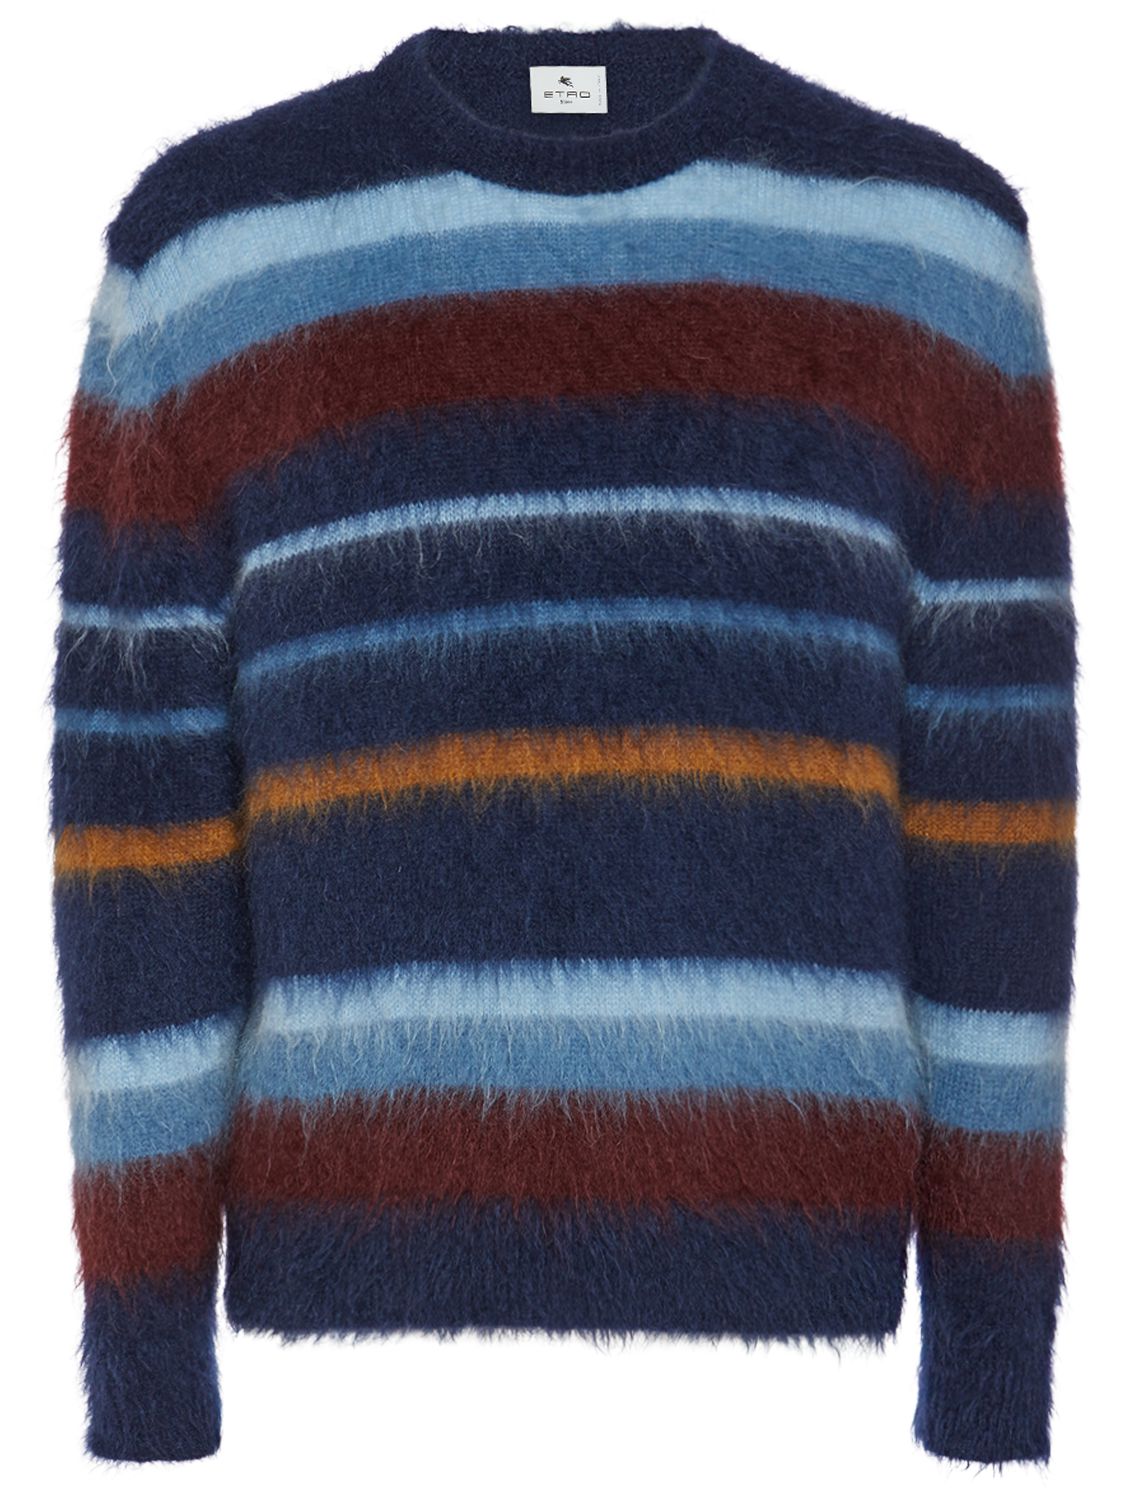 Striped Mohair Knit Crewneck Sweater